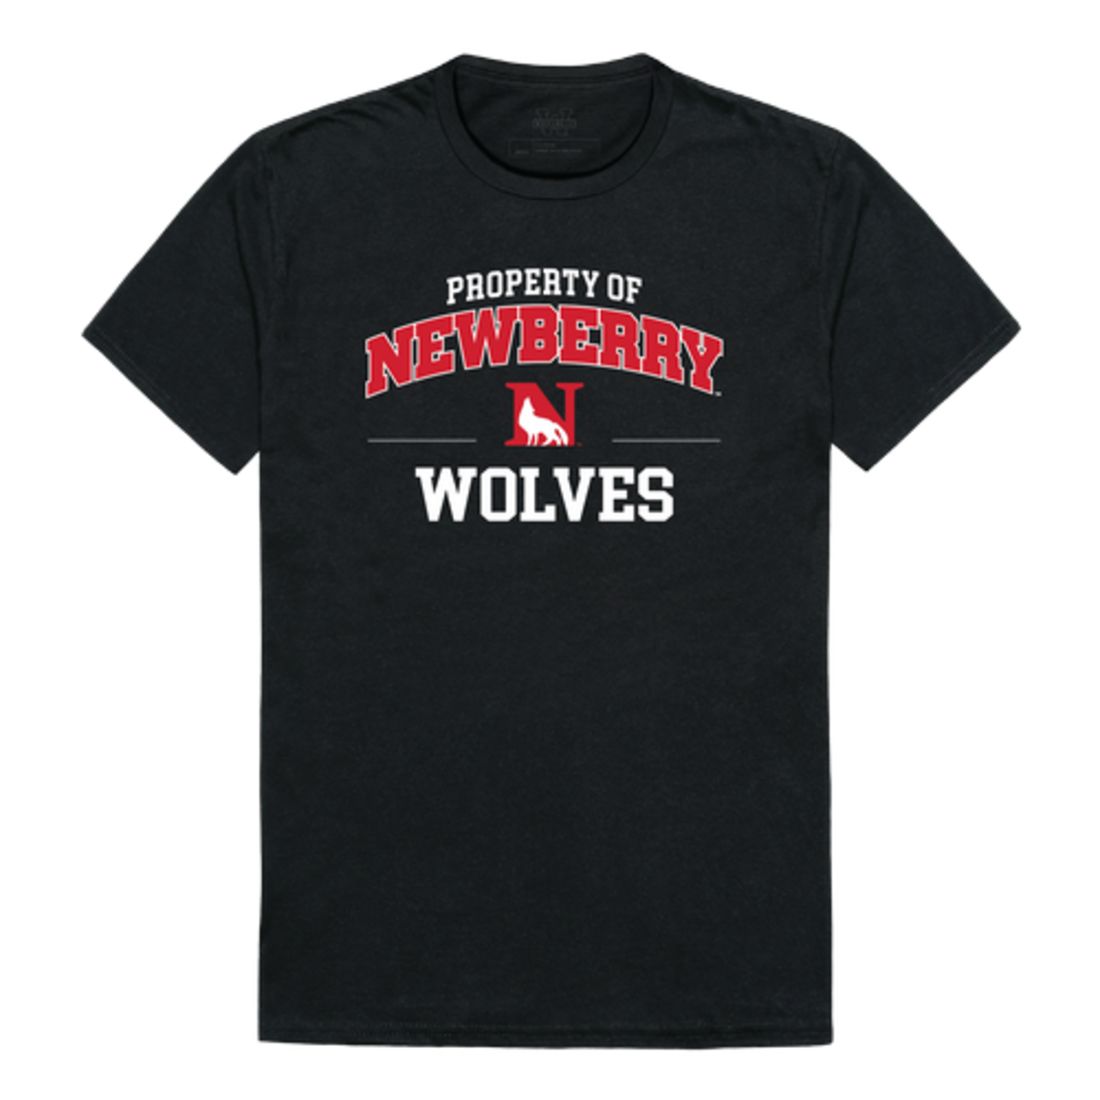 Newberry College Wolves Property T-Shirt